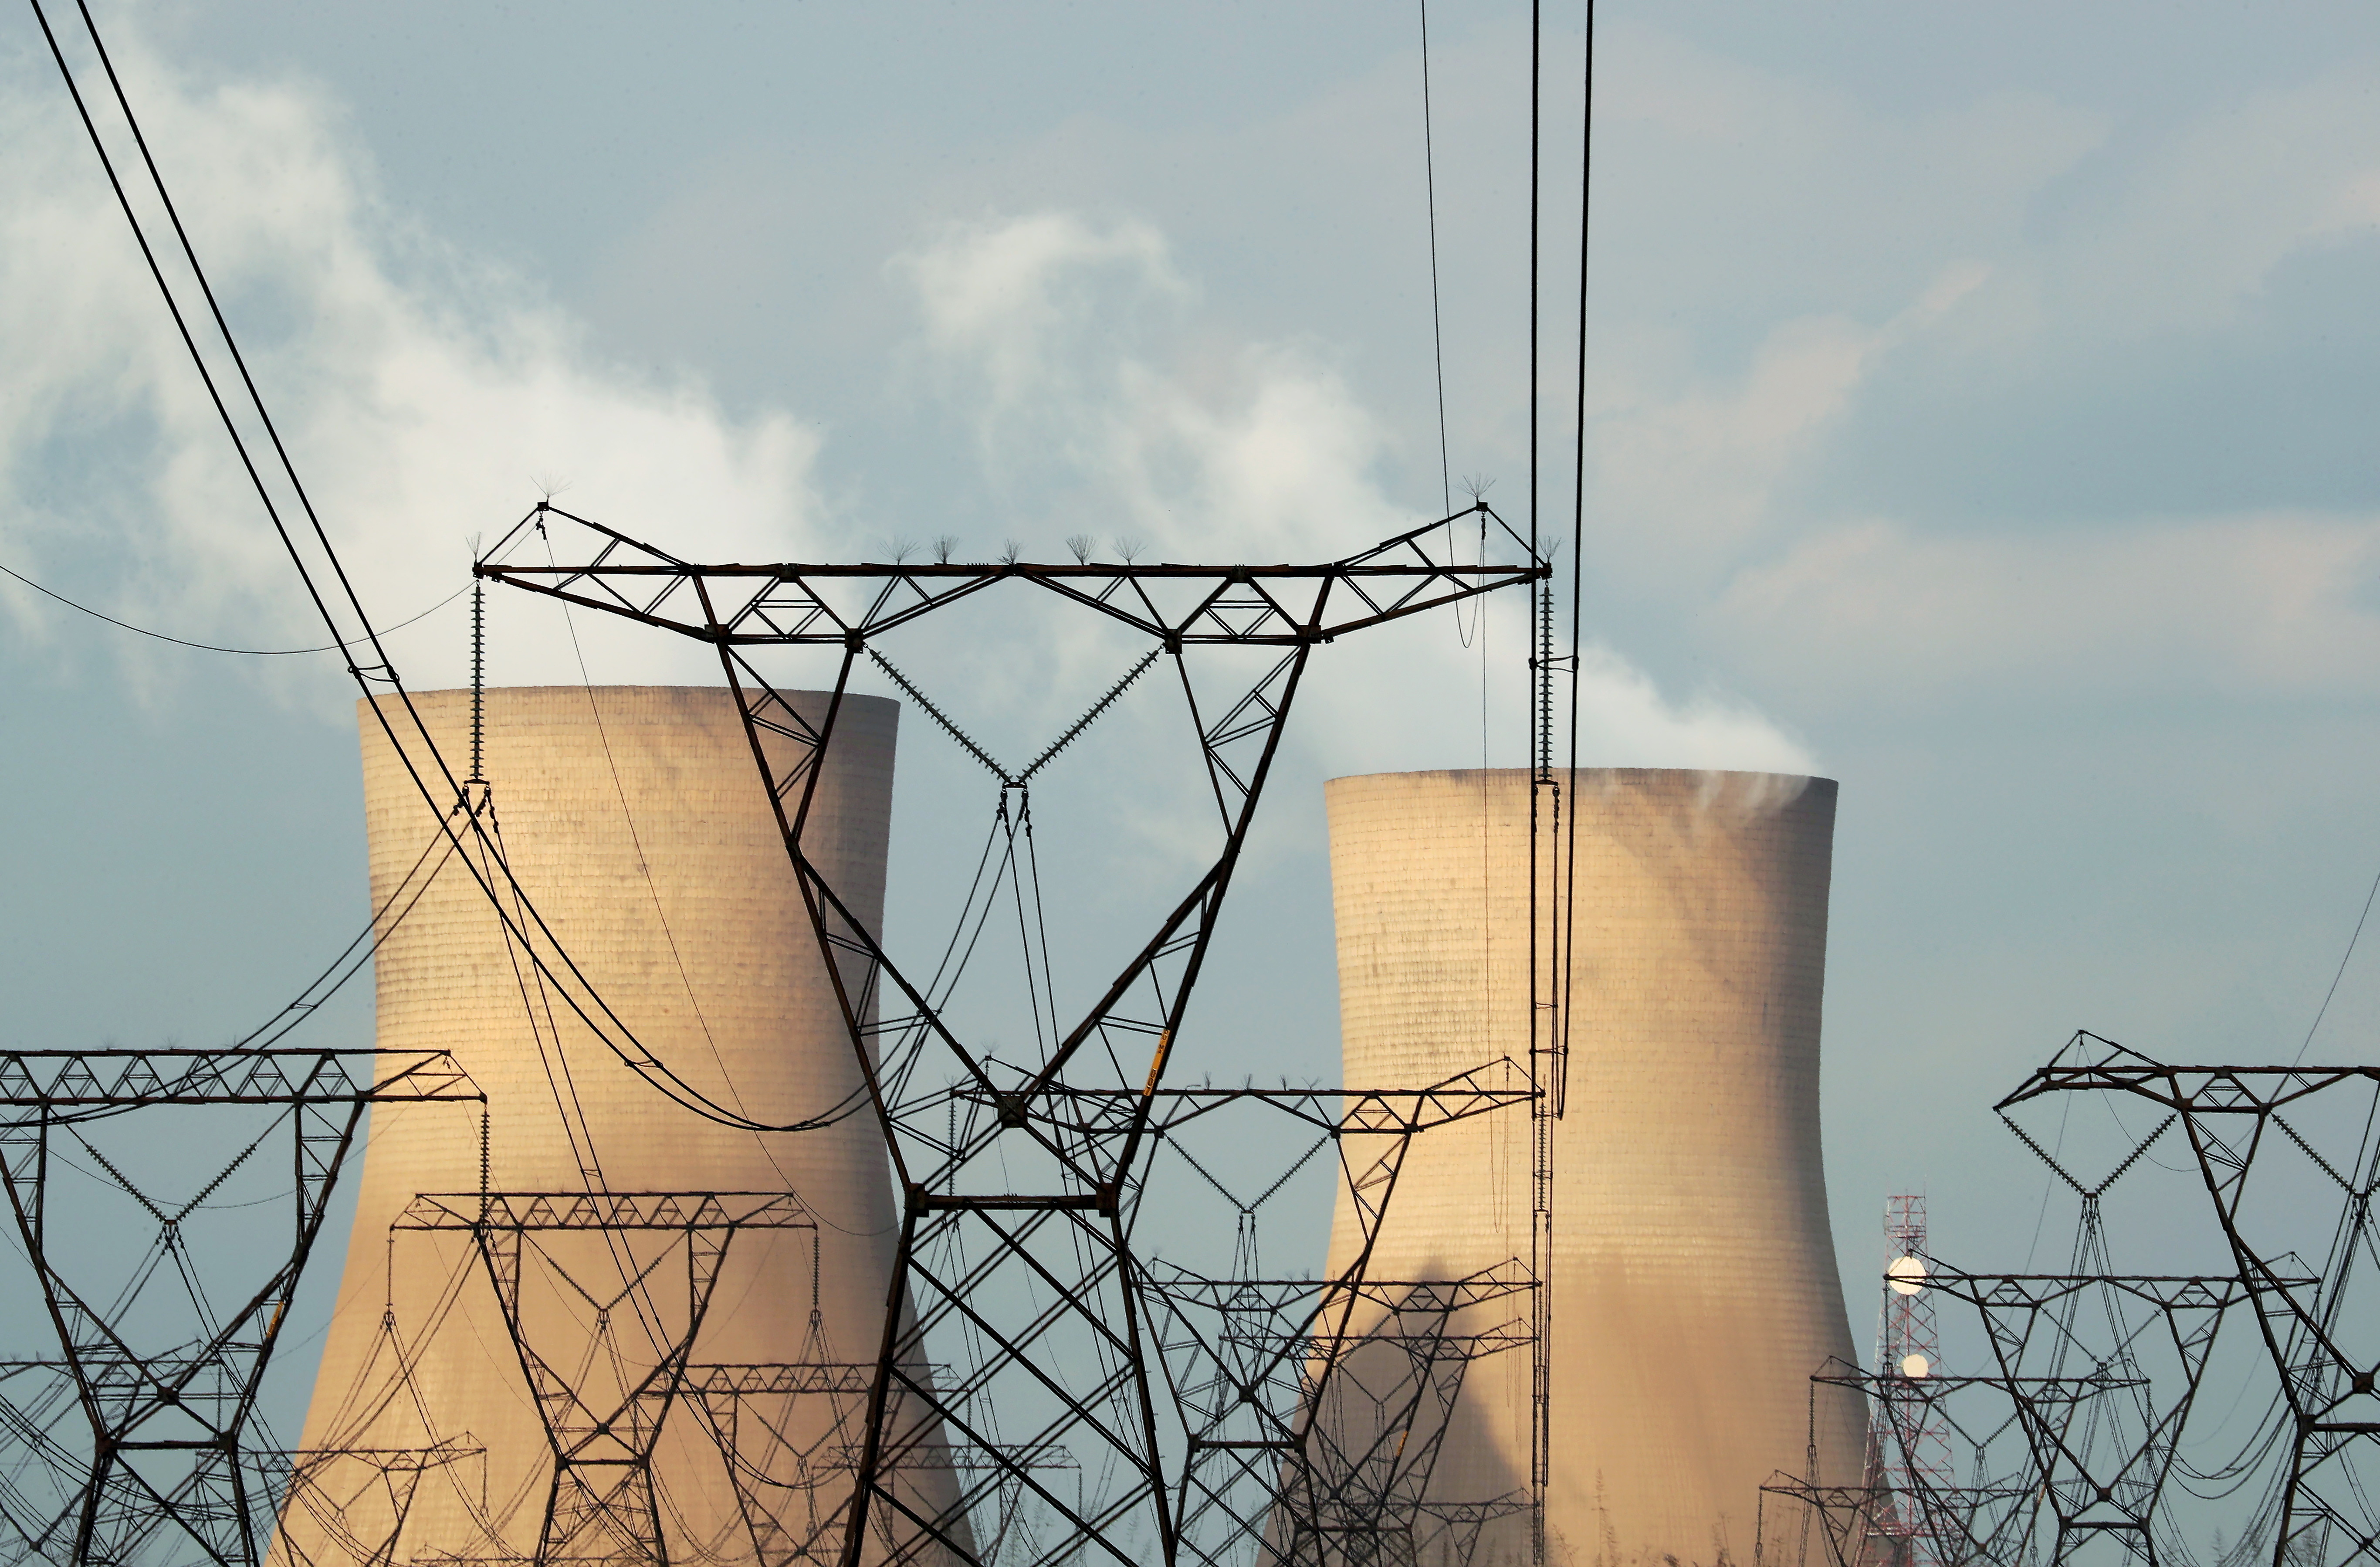 oFILE PHOTO: Cooling towers are pictured at a coal-based power station owned by Eskom in Duhva